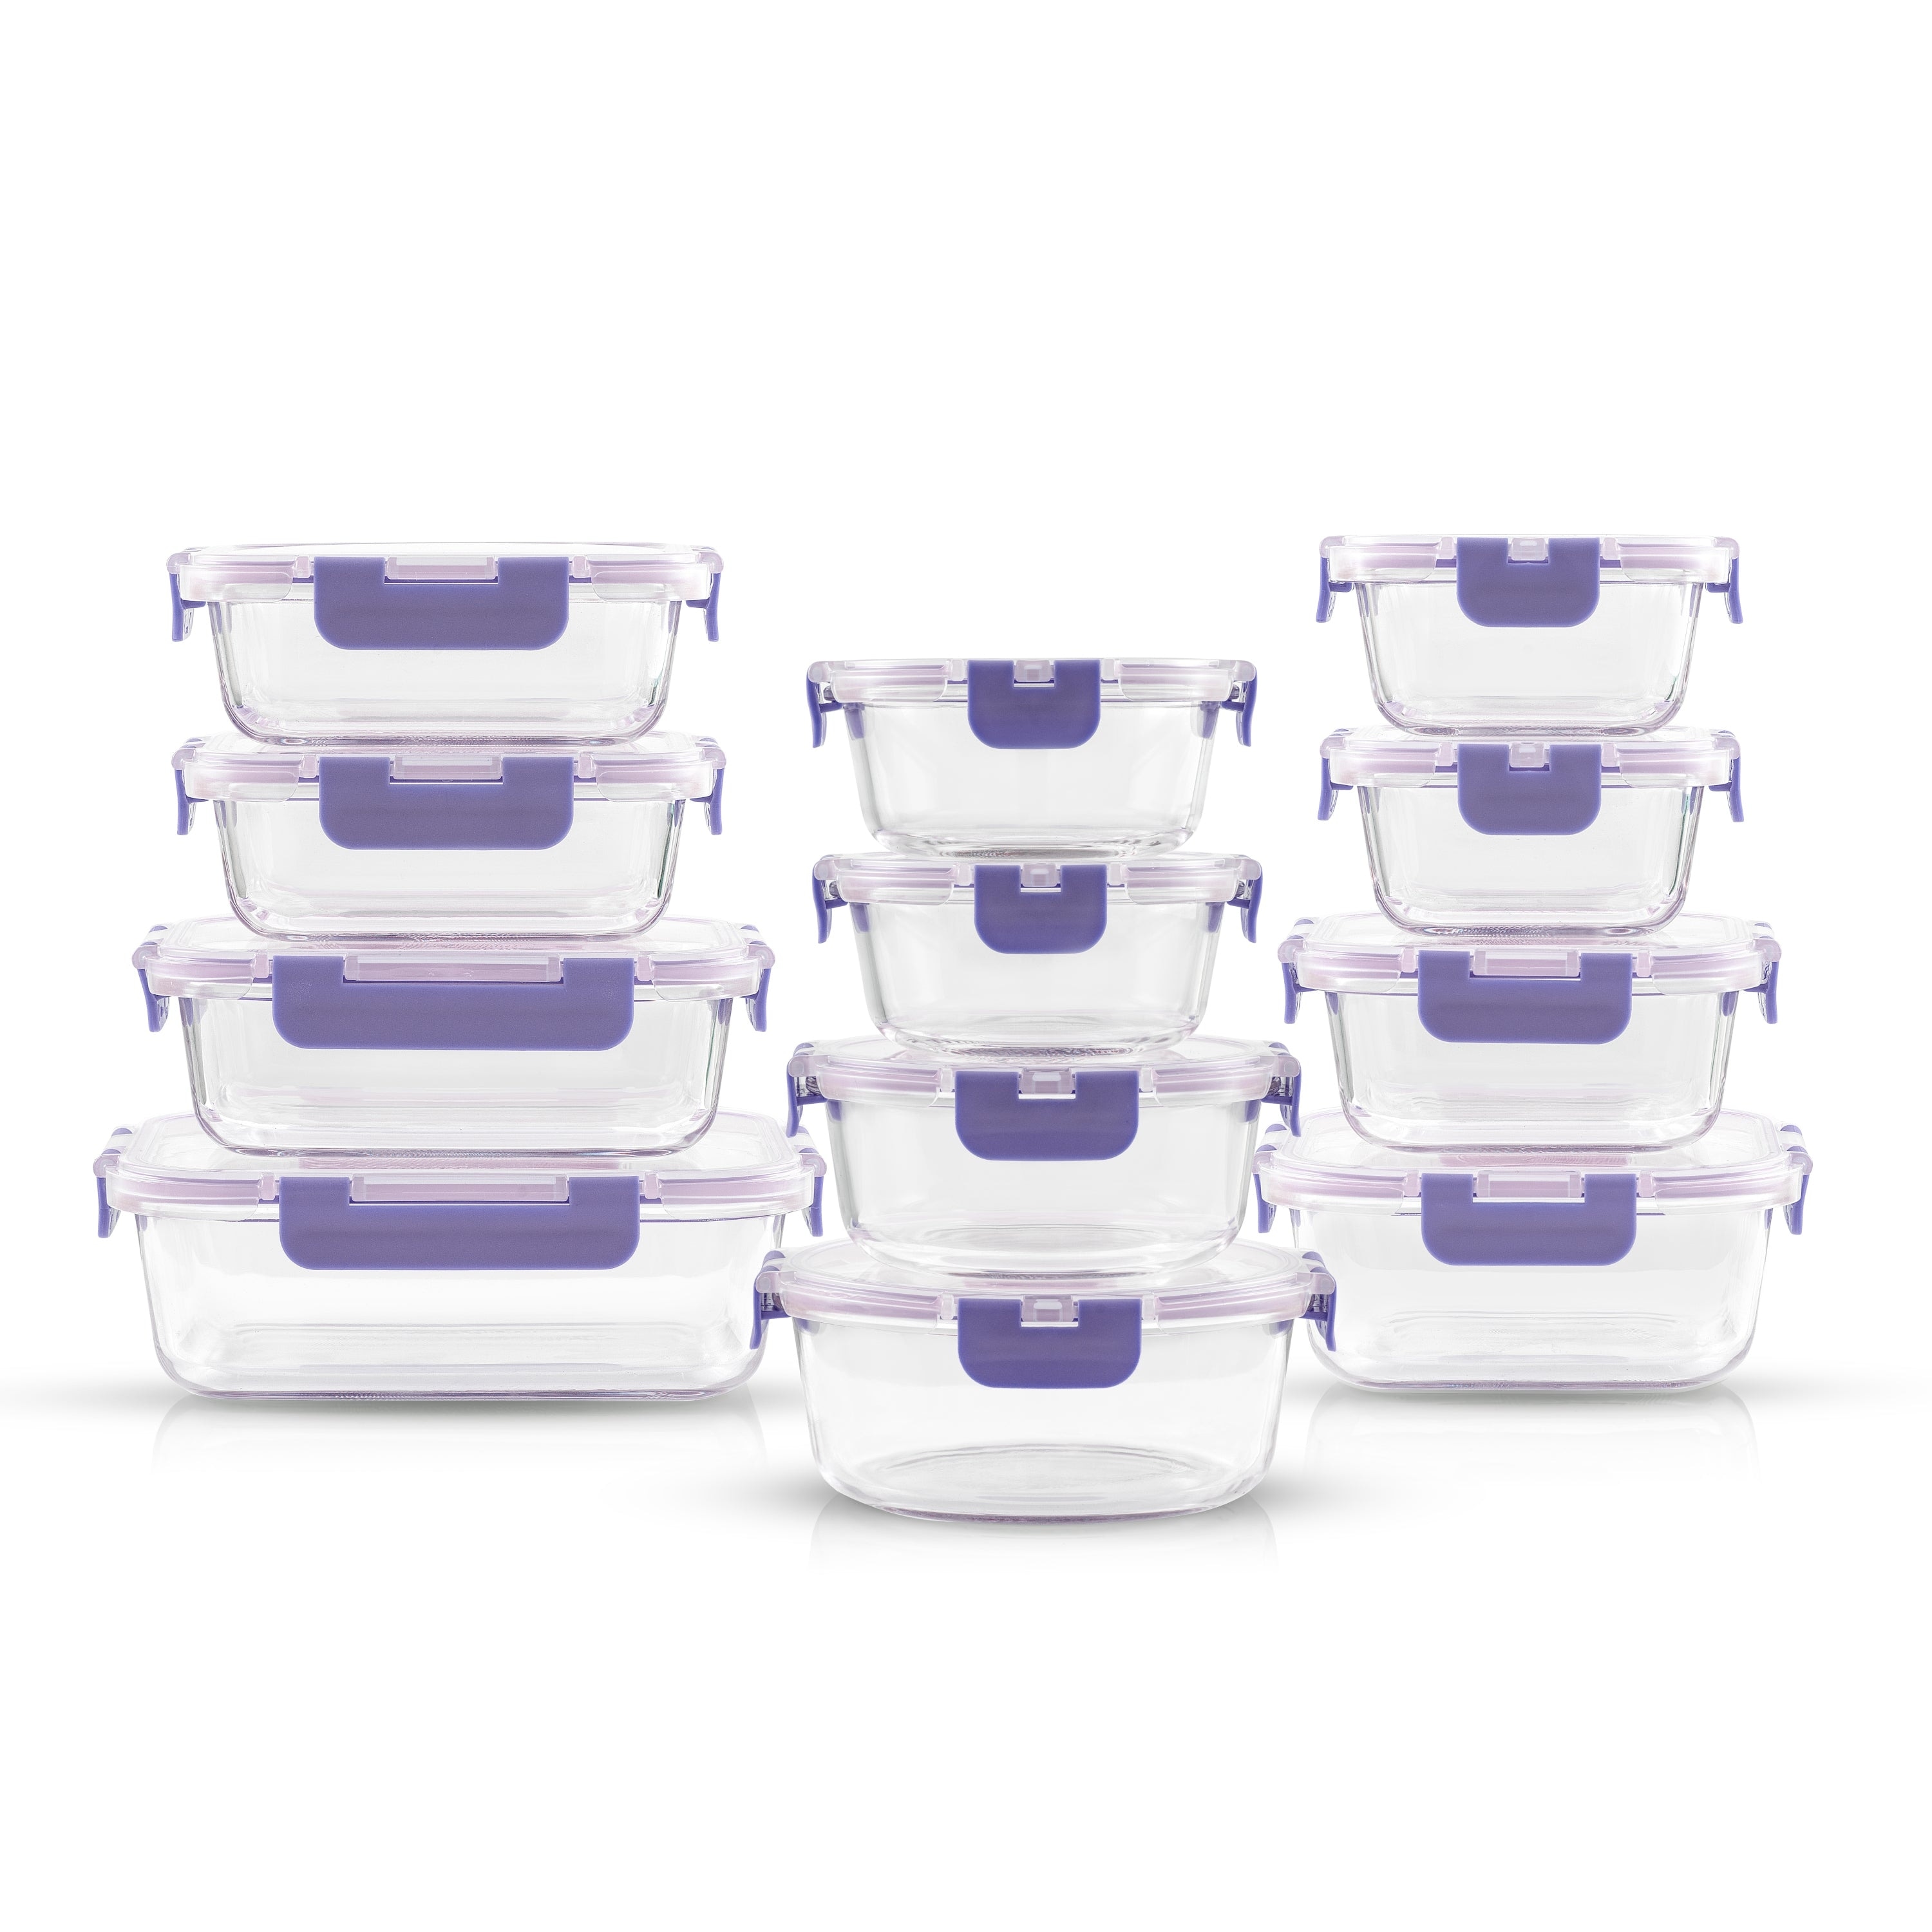 https://ak1.ostkcdn.com/images/products/is/images/direct/61b36fed123b97bb44c4409cf765a5aea6e601c1/JoyFul-24-Piece-Glass-Food-Storage-Containers-Set-with-Airtight-Lids.jpg